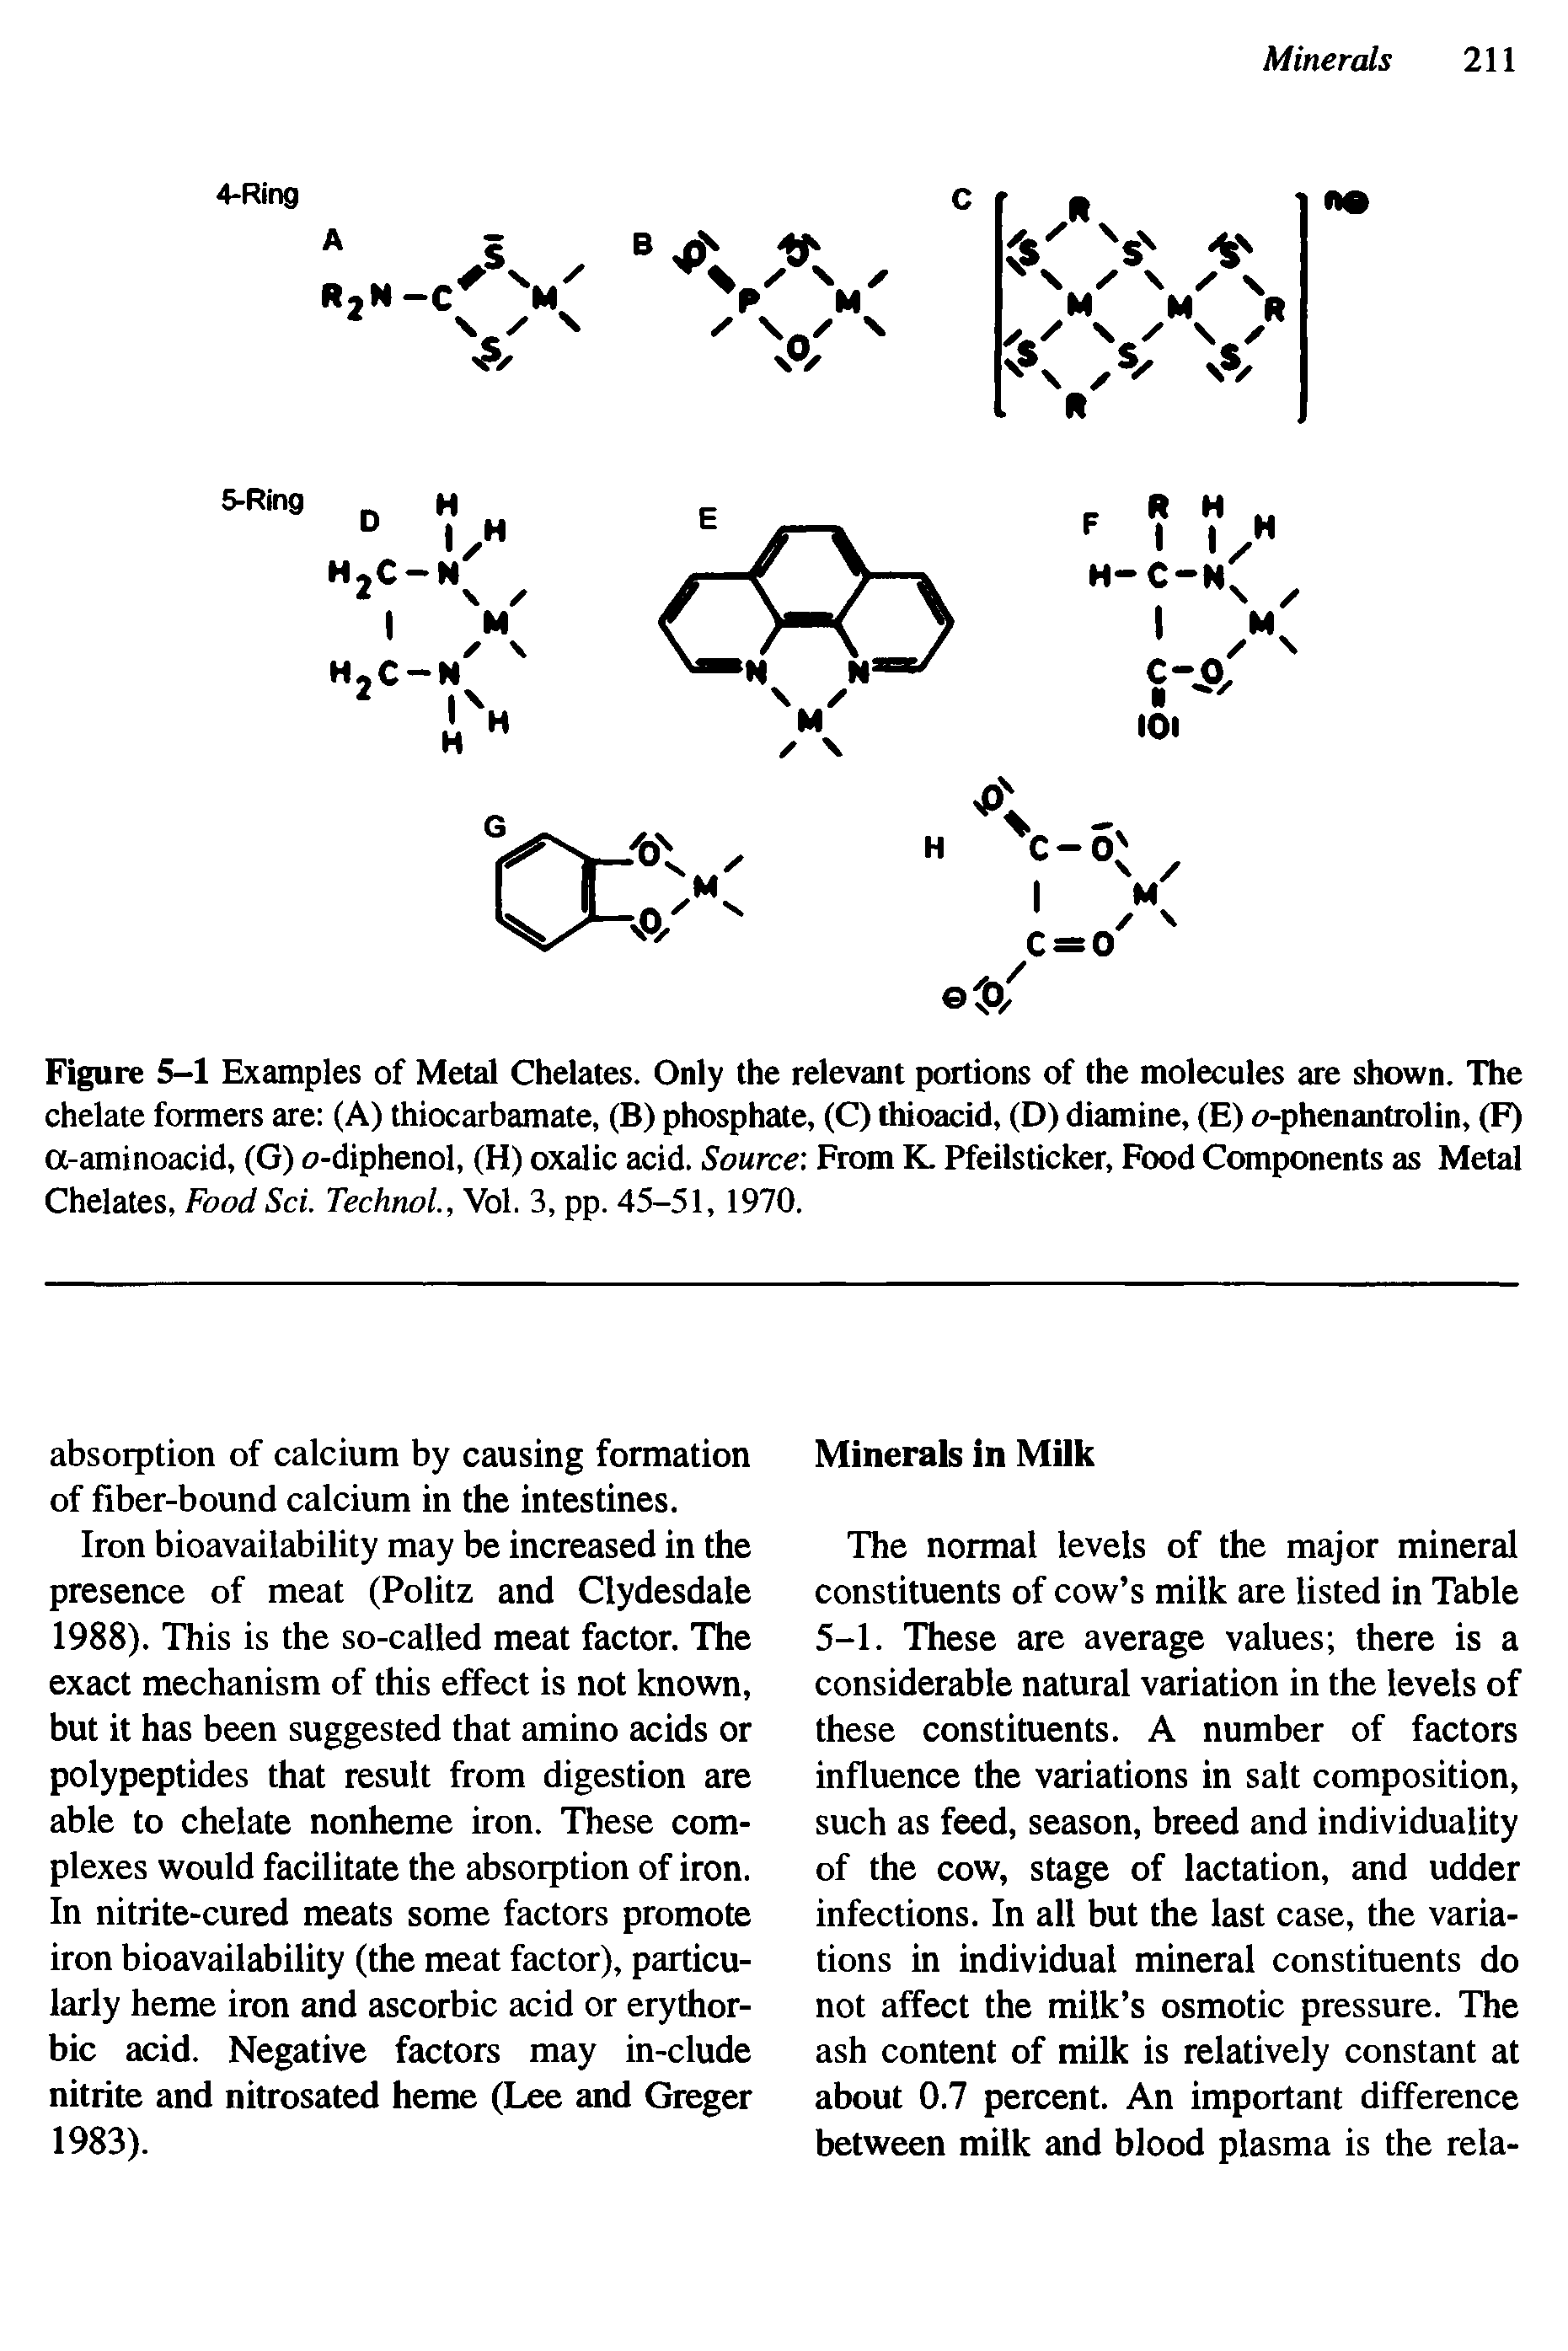 Figure 5-1 Examples of Metal Chelates. Only the relevant portions of the molecules are shown. The chelate formers are (A) thiocarbamate, (B) phosphate, (C) thioacid, (D) diamine, (E) o-phenantrolin, (F) a-aminoacid, (G) o-diphenol, (H) oxalic acid. Source From K. Pfeilsticker, Food Components as Metal Chelates, Food Sci. Technol., Vol. 3, pp. 45-51, 1970.